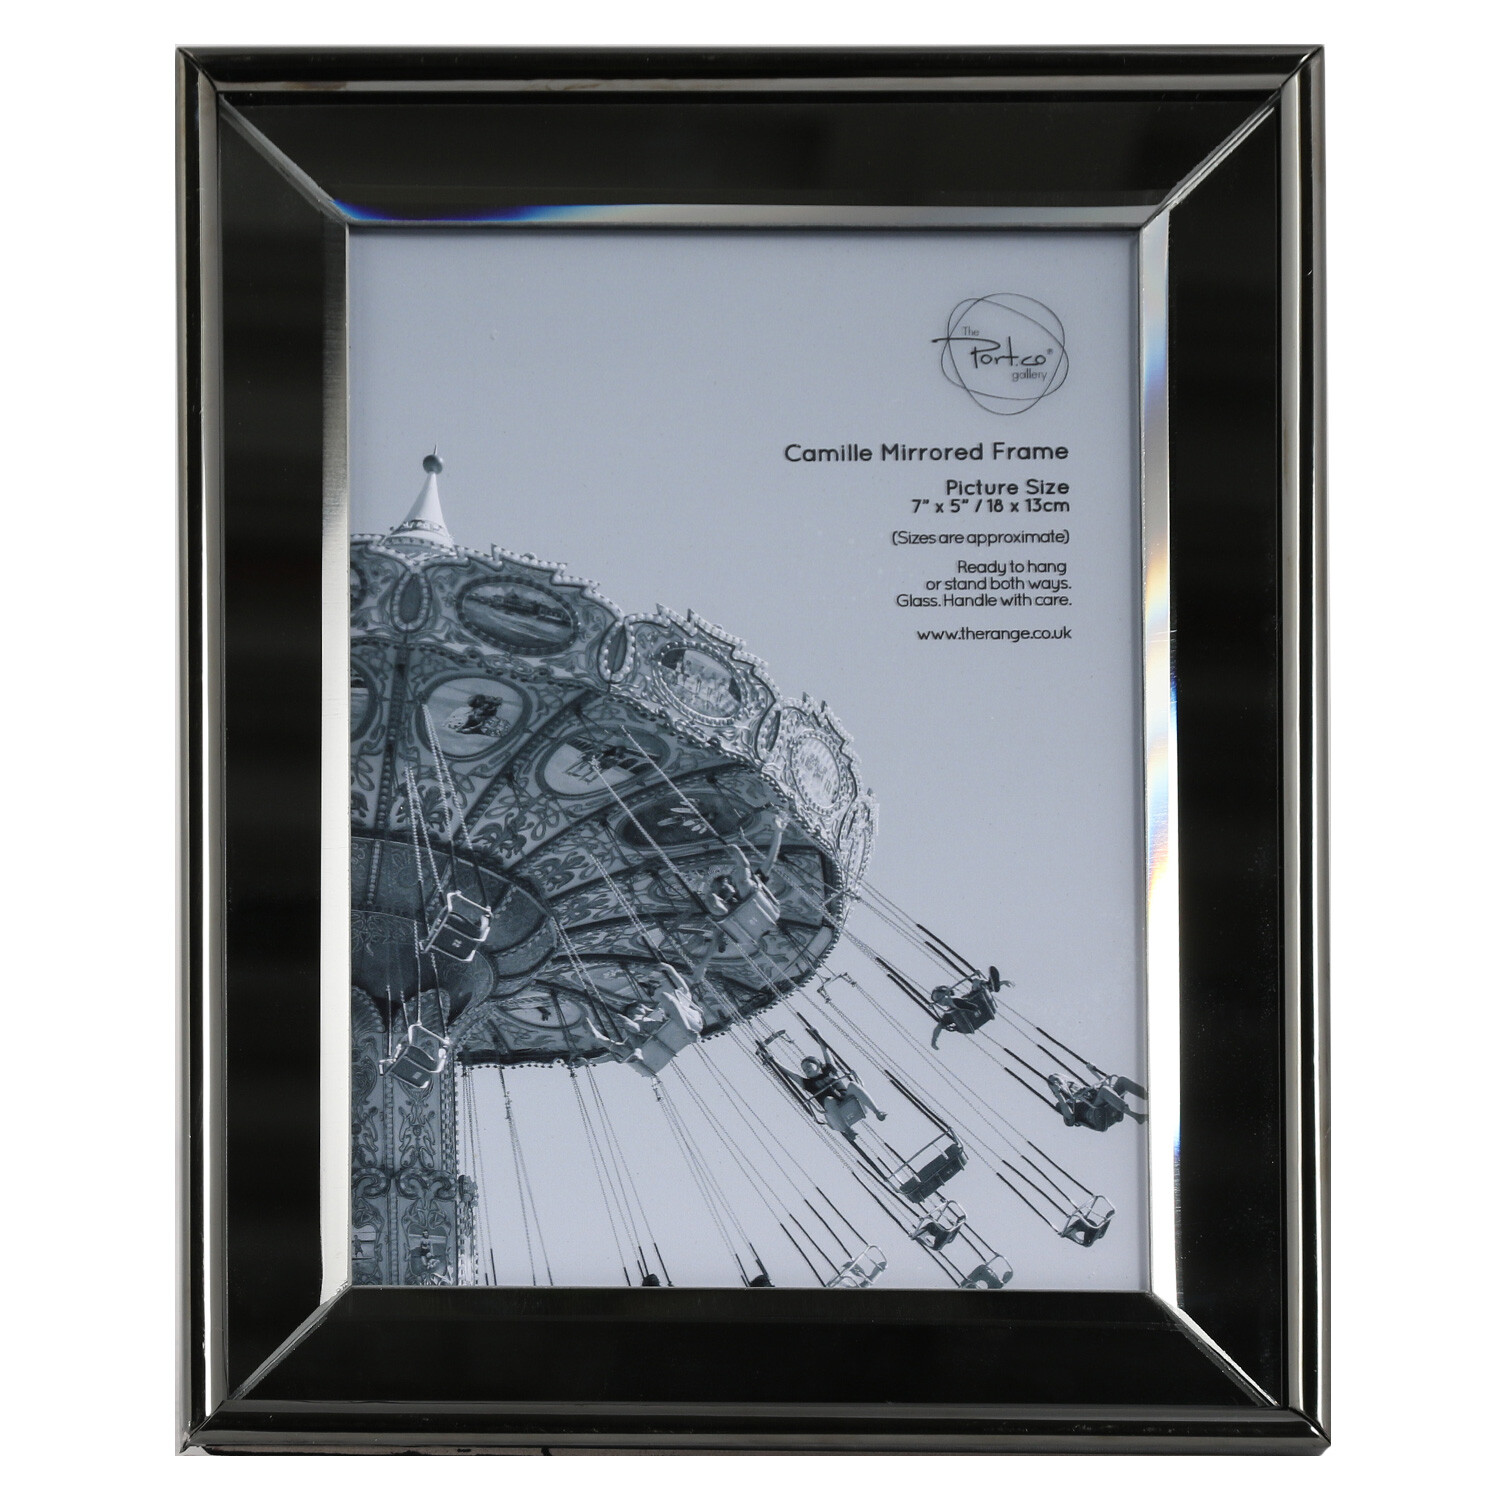 The Port. Co Gallery Camille Black Mirrored Photo Frame 7 x 5 inch Image